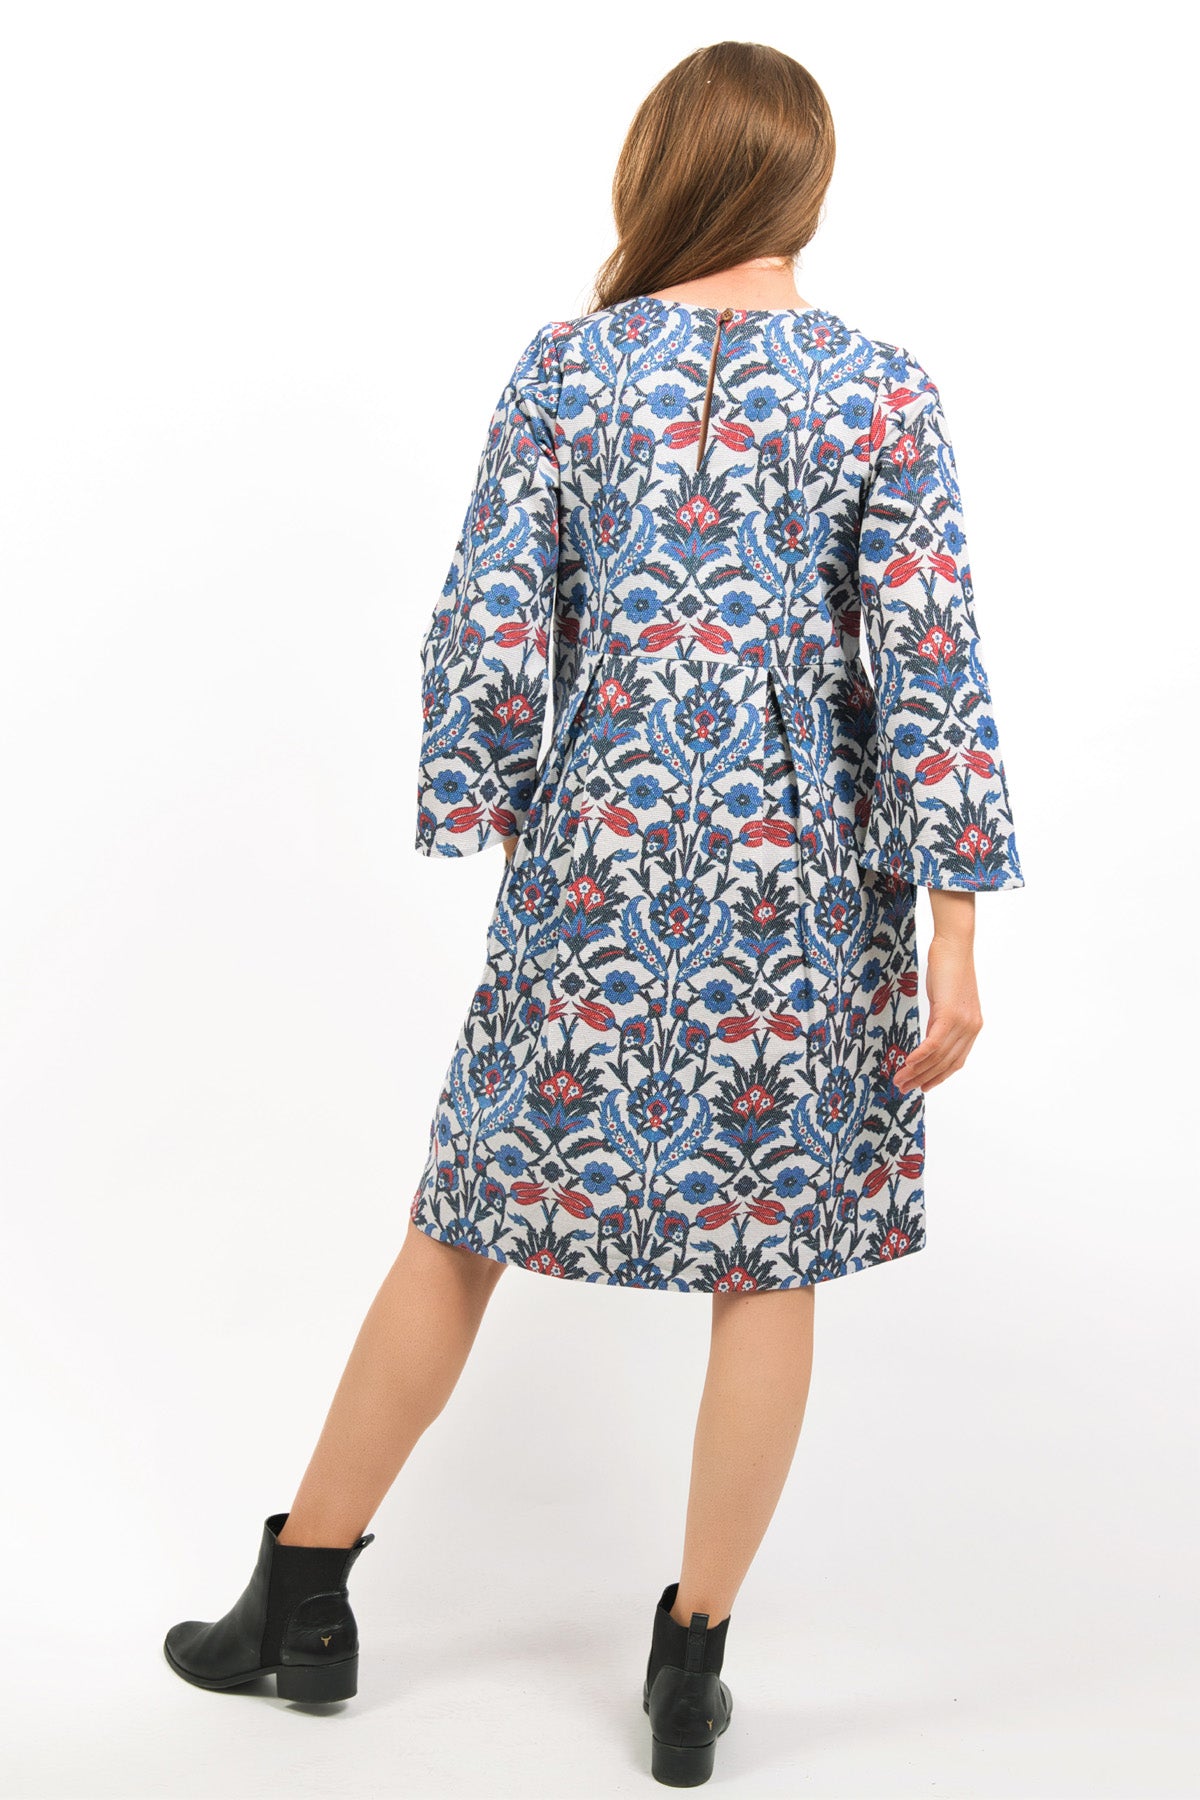 LUNA LUREX PRINTED FLORAL DRESS - BACK VIEW SHOWING PLEATED DETAILS AND NECK SLIT zohaonline